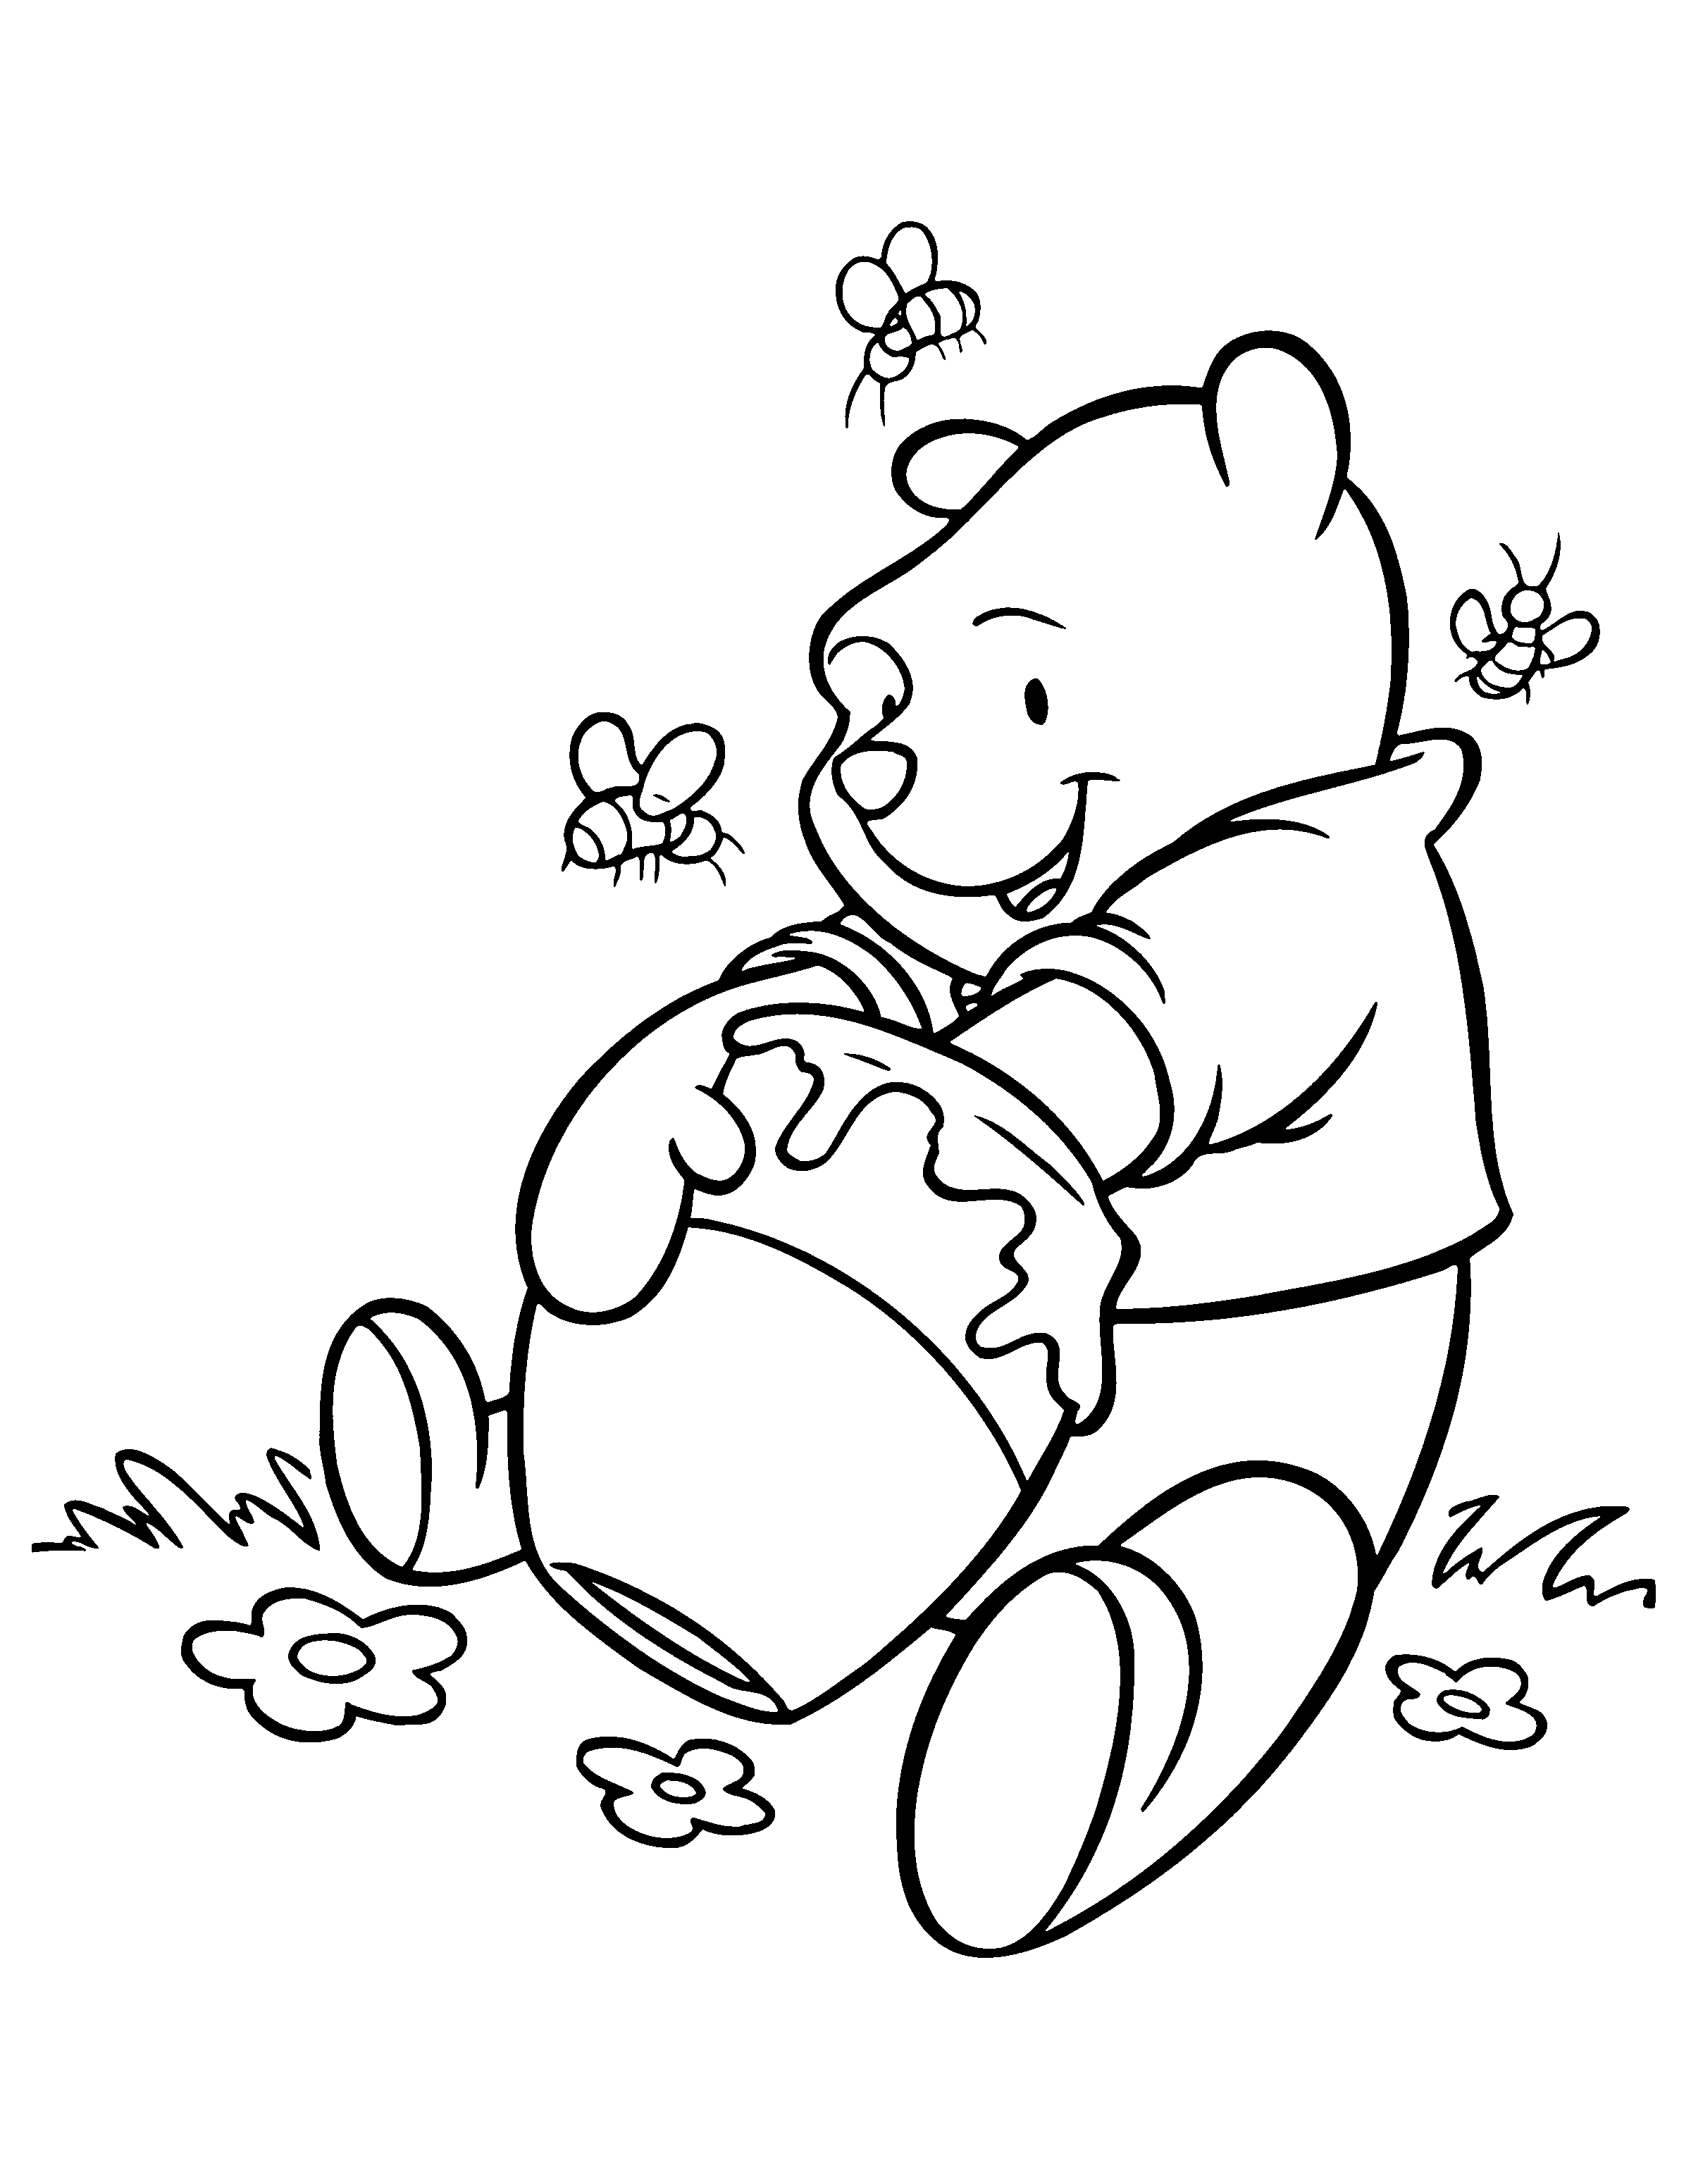 pooh color cute disney pooh bear coloring page h m coloring pages pooh color 